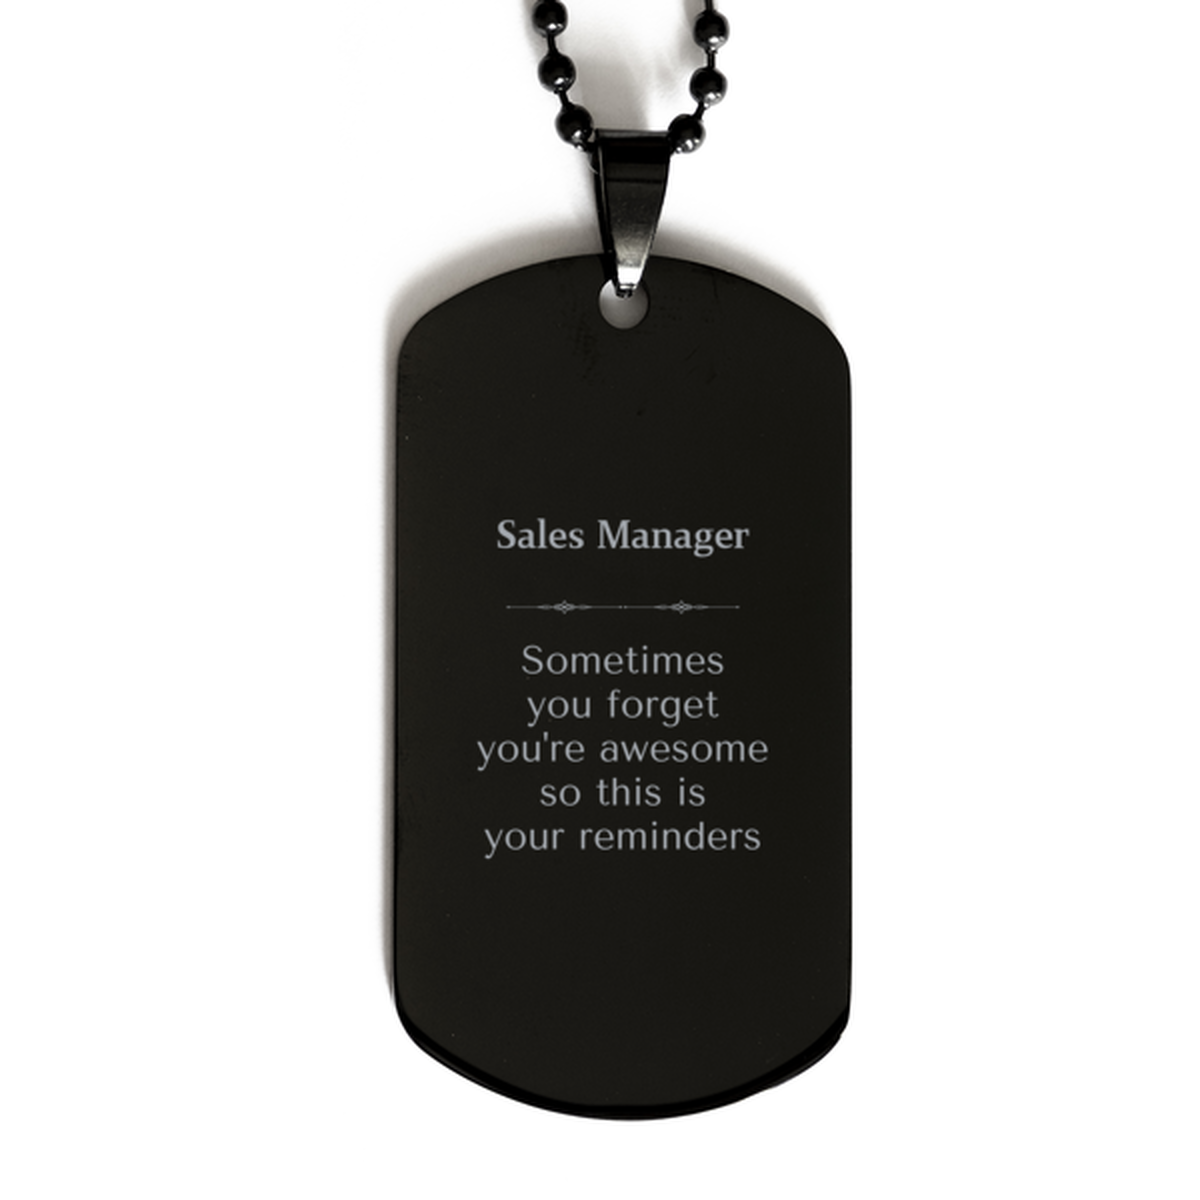 Sentimental Sales Manager Black Dog Tag, Sales Manager Sometimes you forget you're awesome so this is your reminders, Graduation Christmas Birthday Gifts for Sales Manager, Men, Women, Coworkers